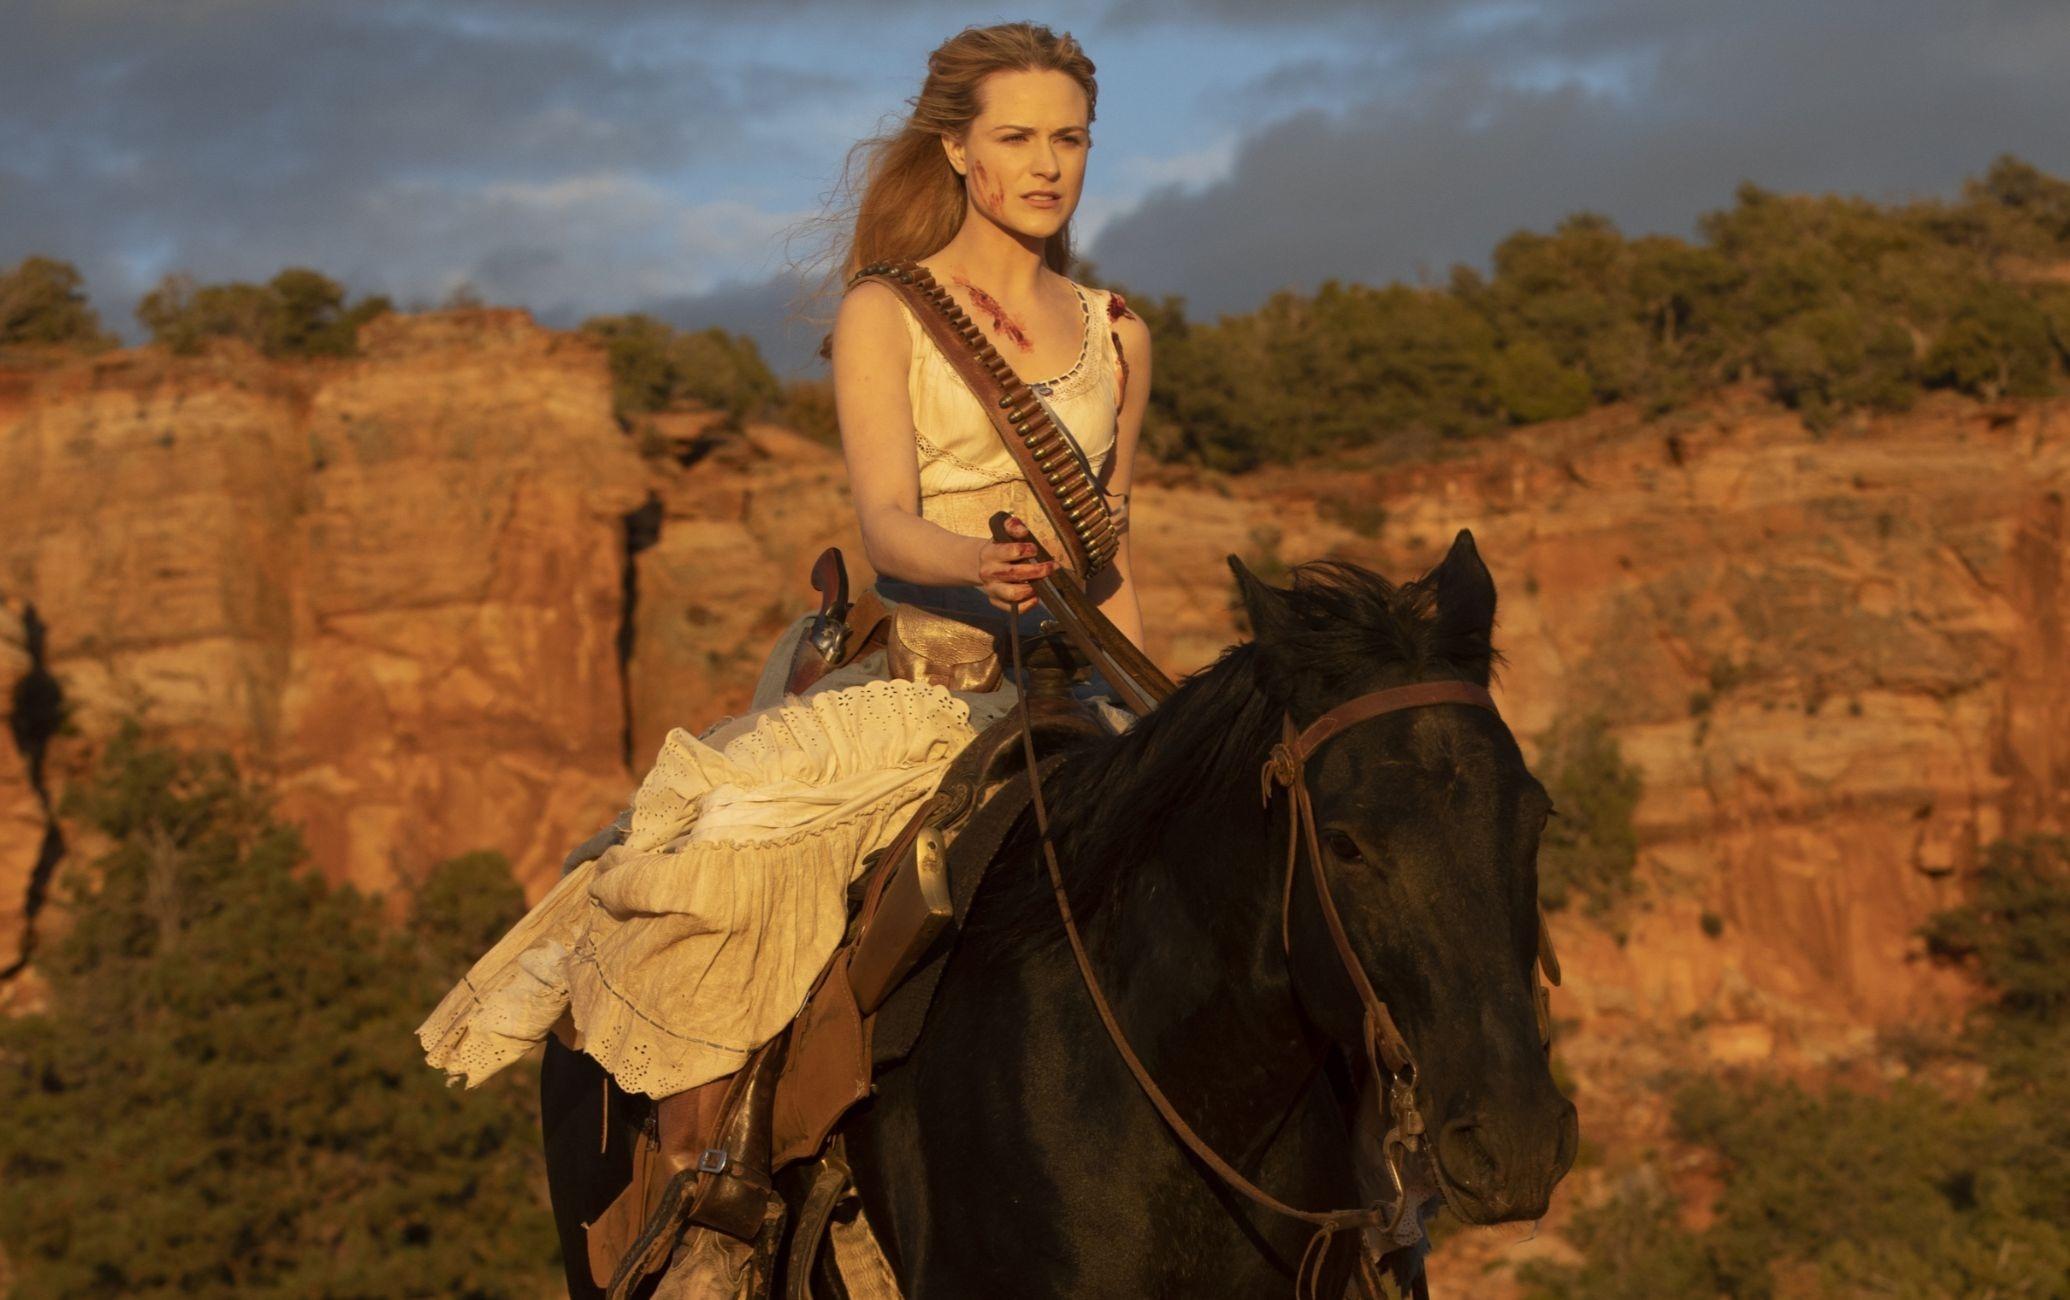 Evan Rachel Wood garnered a Best Lead Actress nomination for her role in HBO's acclaimed sci-fi Western drama 